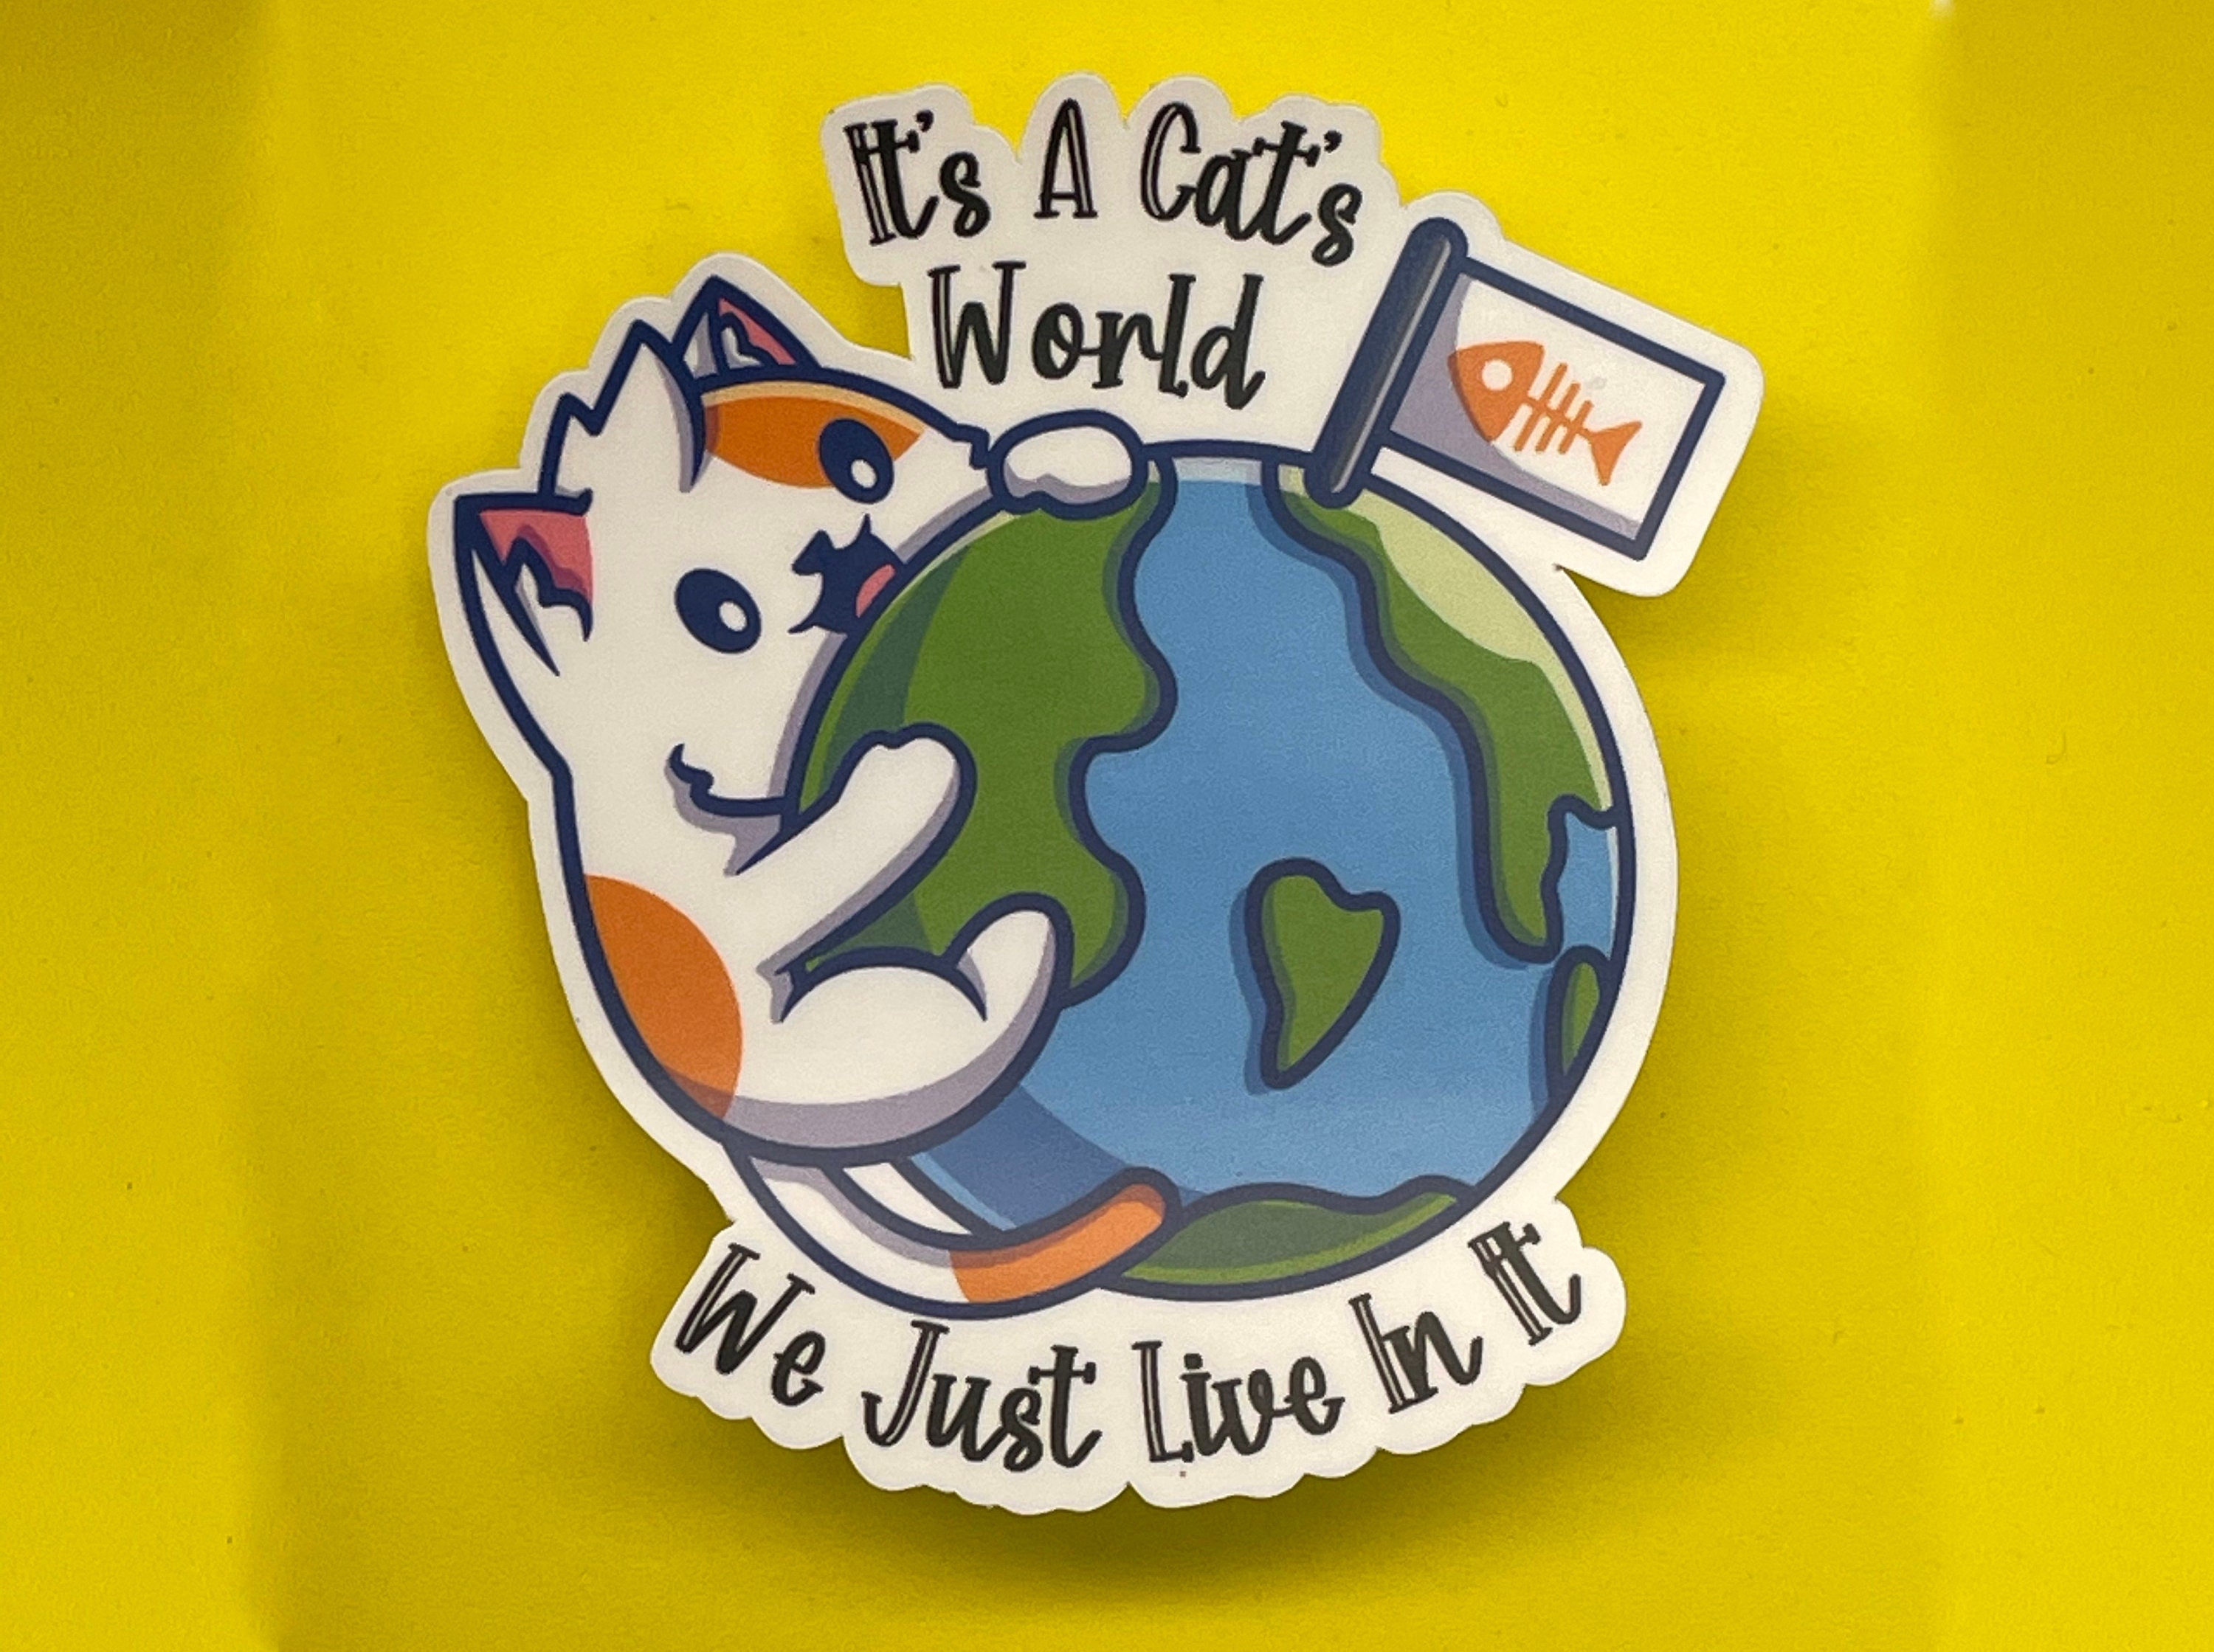 It's a Cat's World, We Just Live In It Sticker